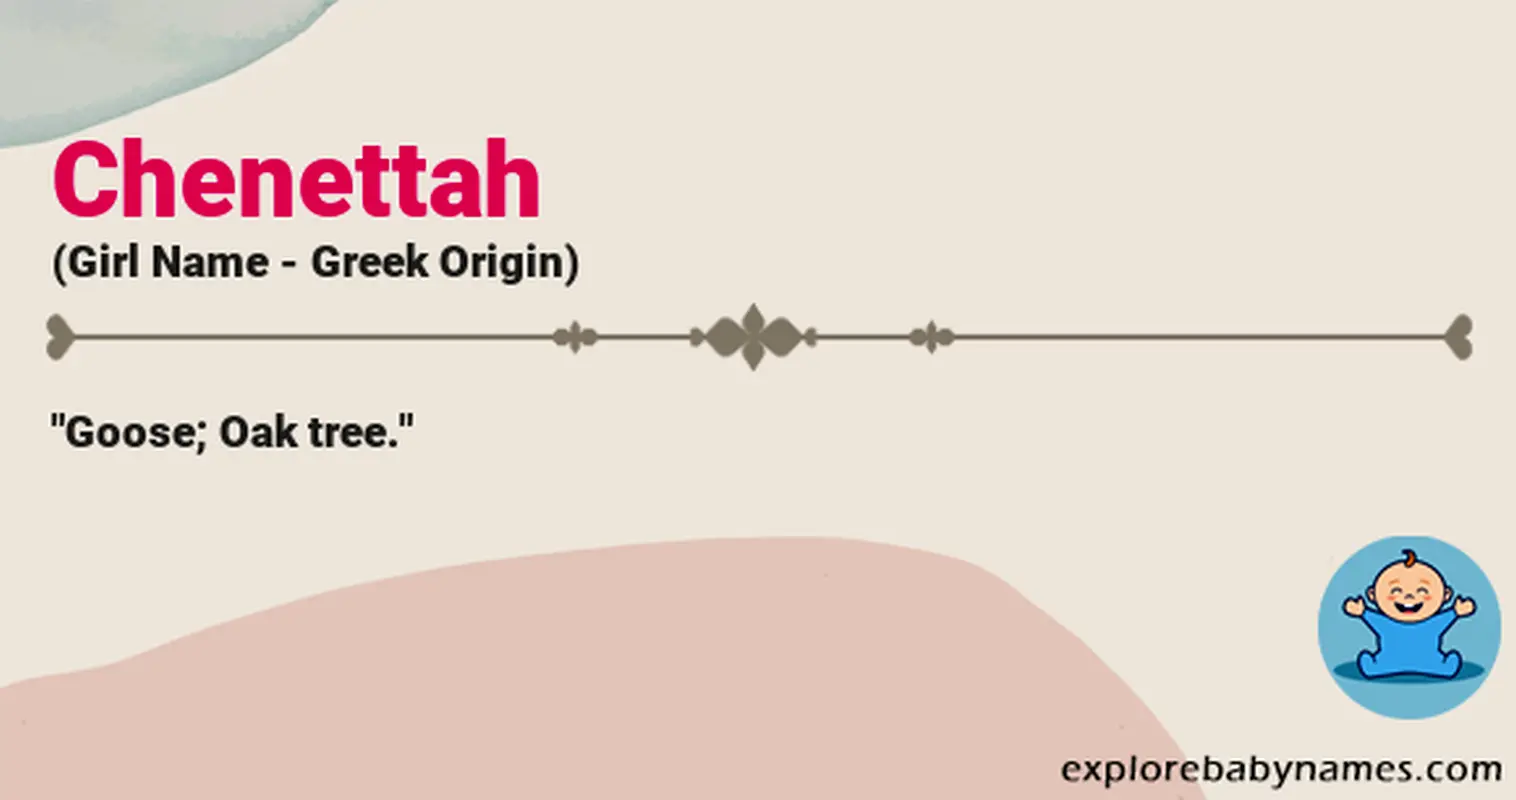 Meaning of Chenettah